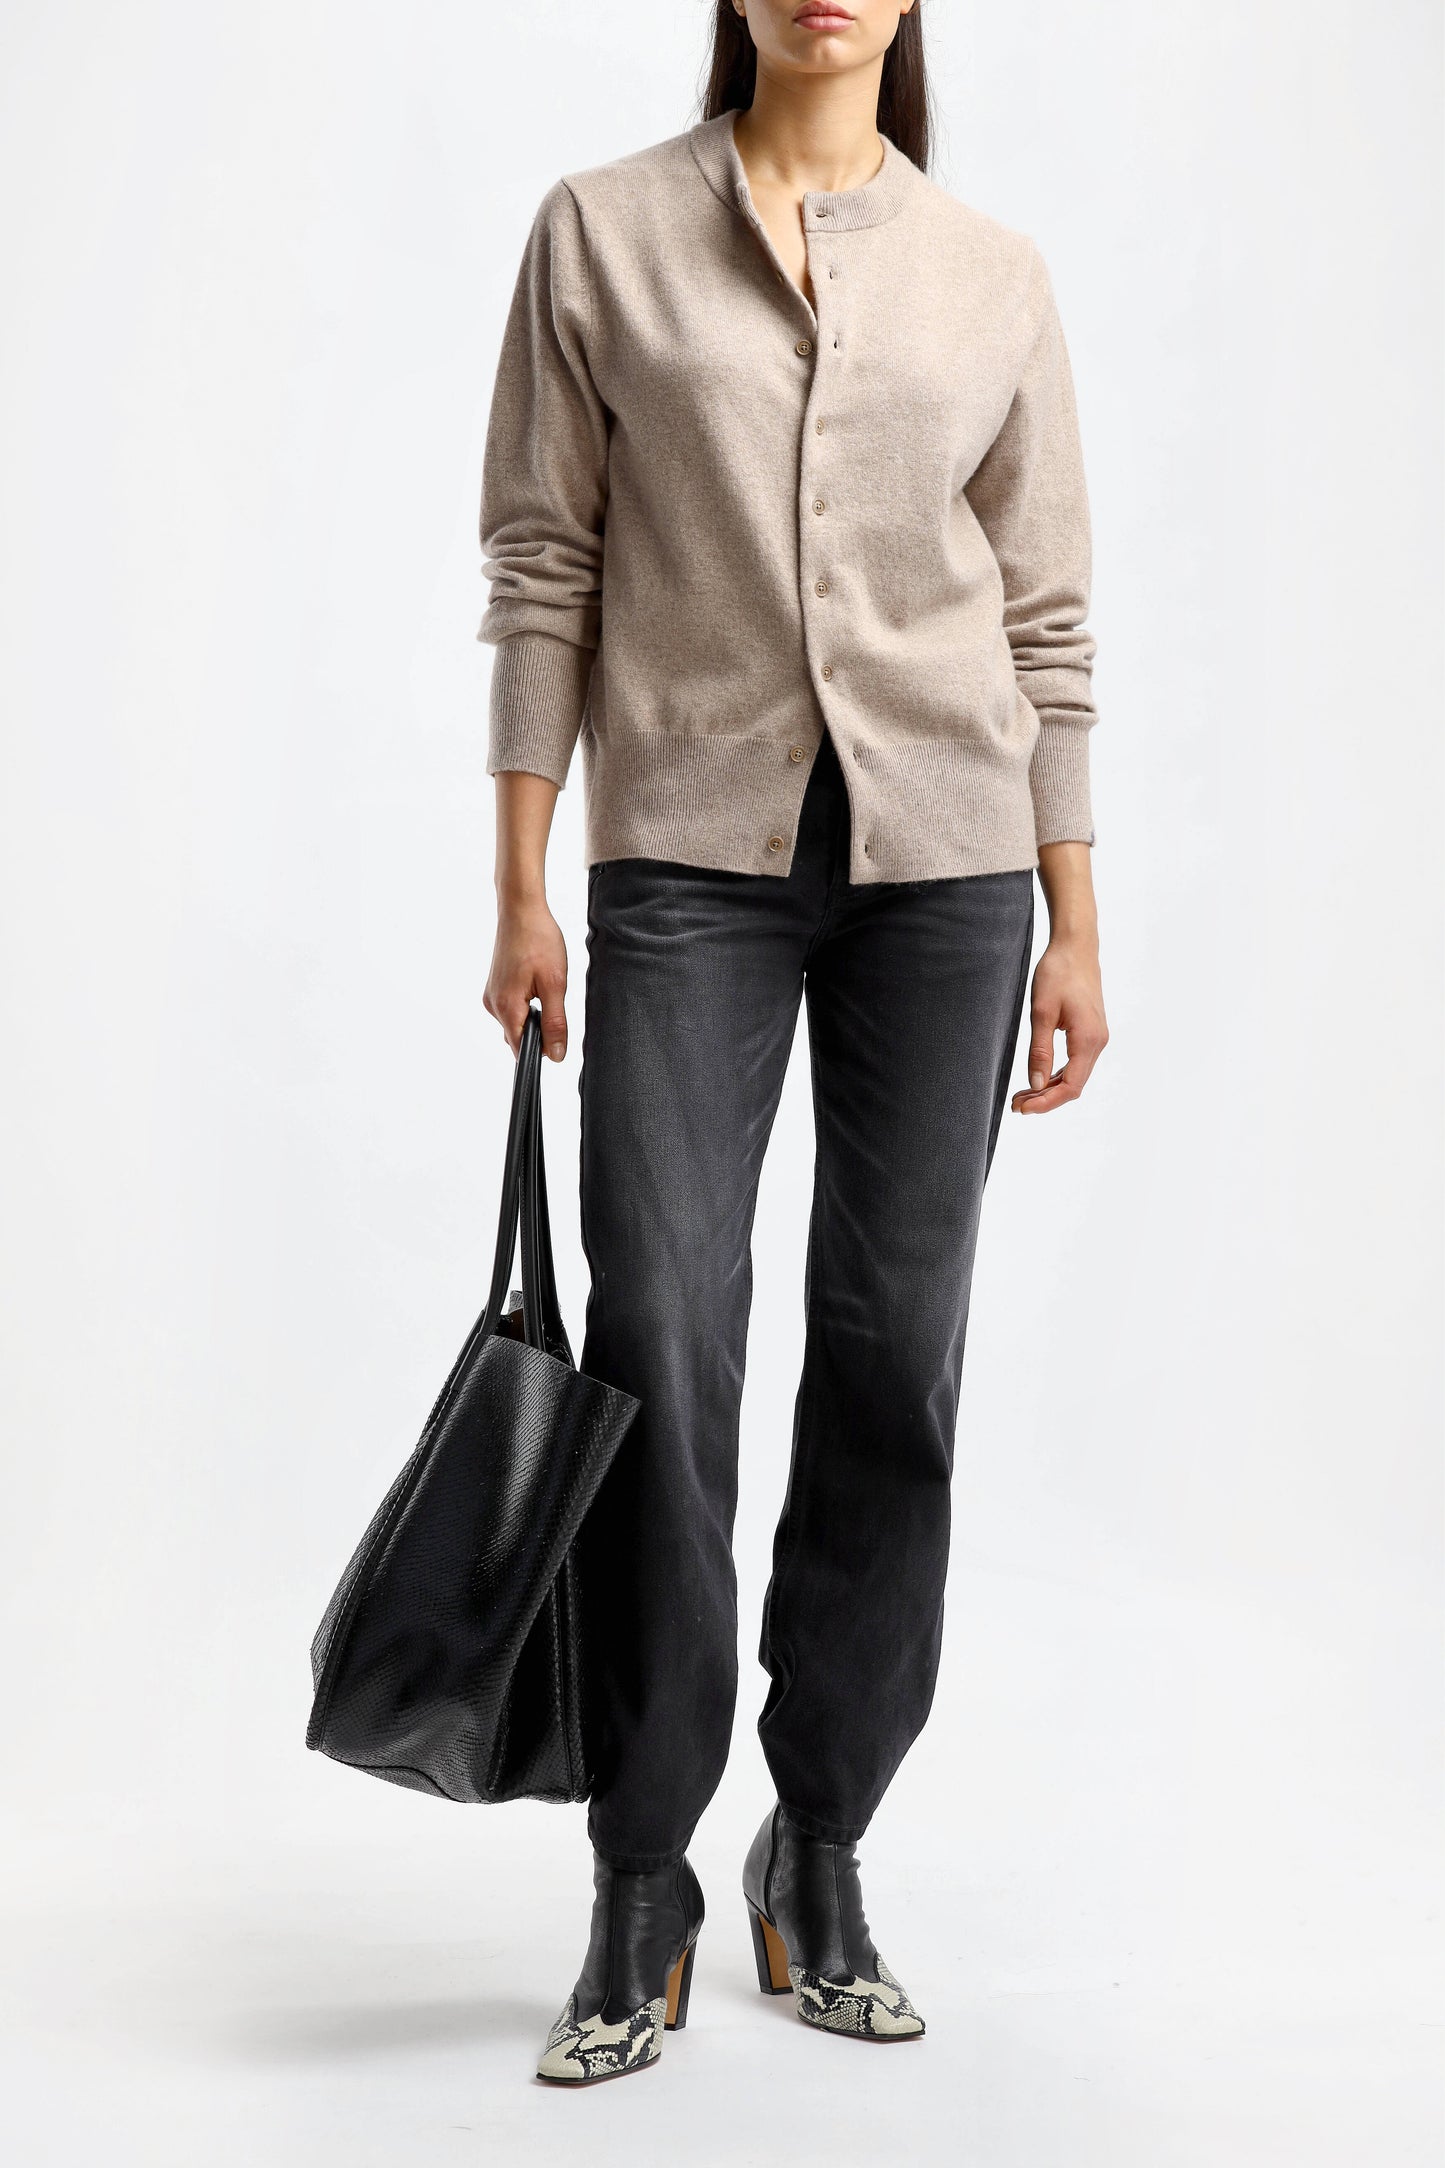 Cardigan Be Game N°283 in SandExtreme Cashmere - Anita Hass